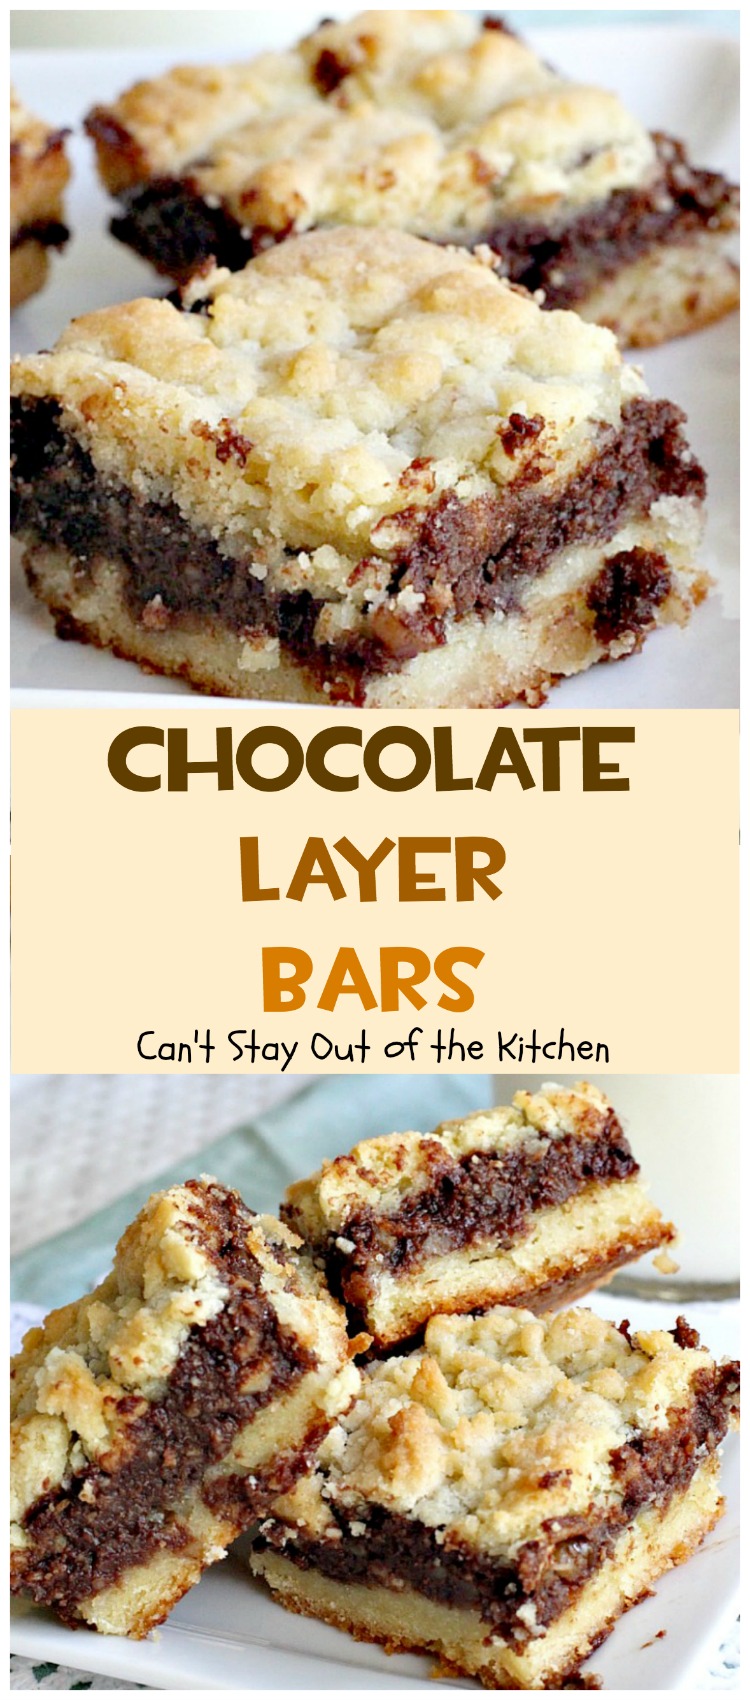 Chocolate Layer Bars | Can't Stay Out of the Kitchen | these #brownies are one of the most spectacular #desserts you'll ever eat. Made with #chocolatechips #creamcheese #almondextract and #walnuts. We love these and make them almost every year at #Christmas!